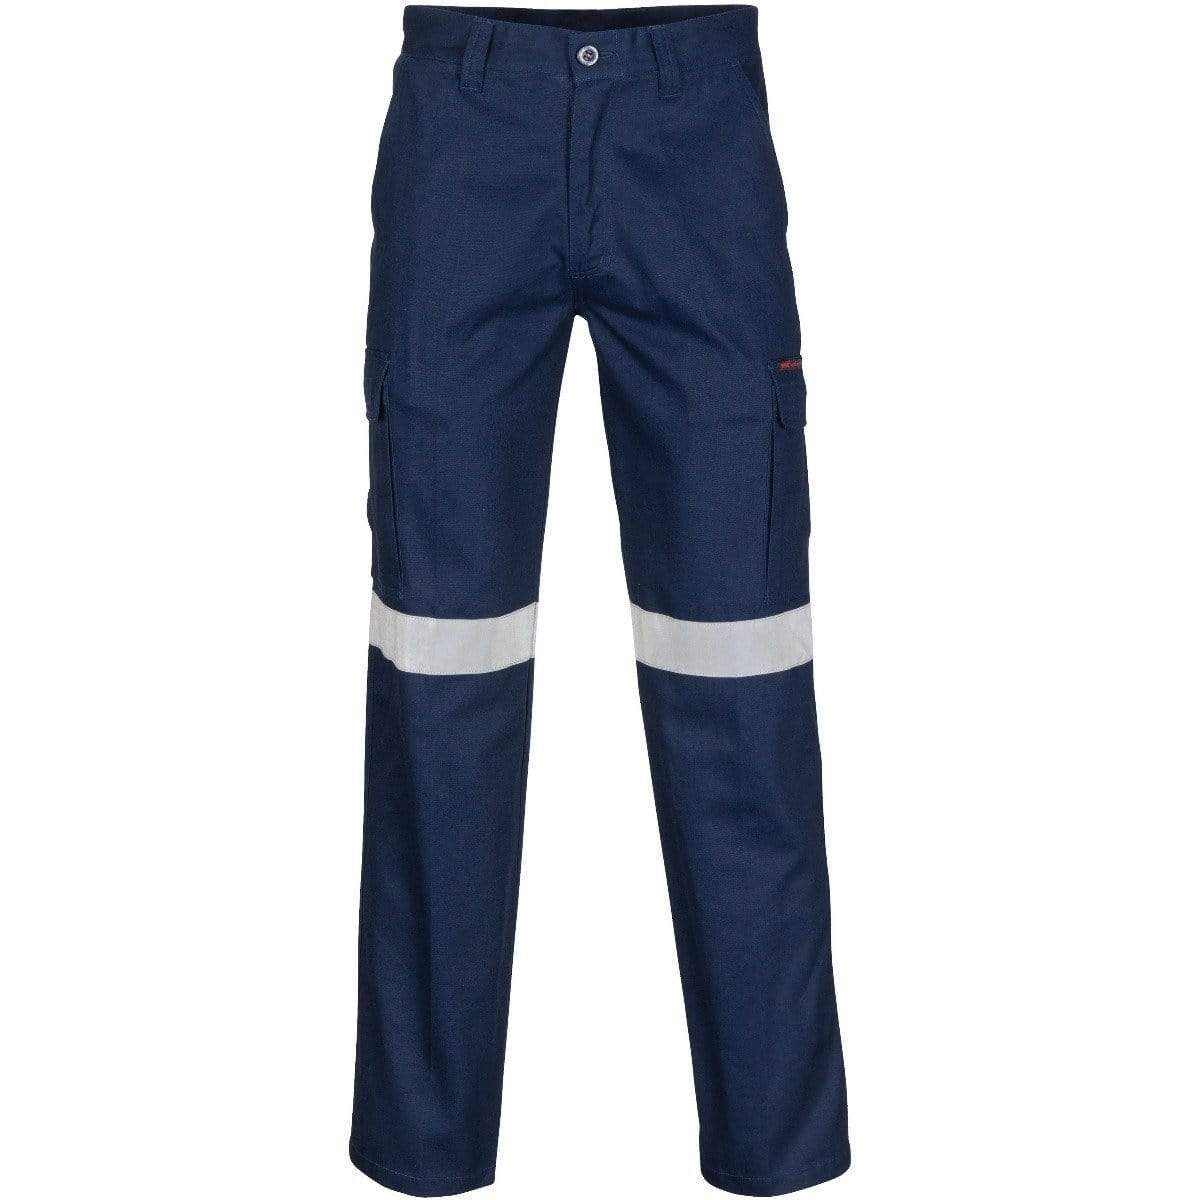 Dnc Workwear Middle Weight Cotton Double Angled Cargo Pants With Crs Reflective Tape - 3360 Work Wear DNC Workwear Navy 72R 